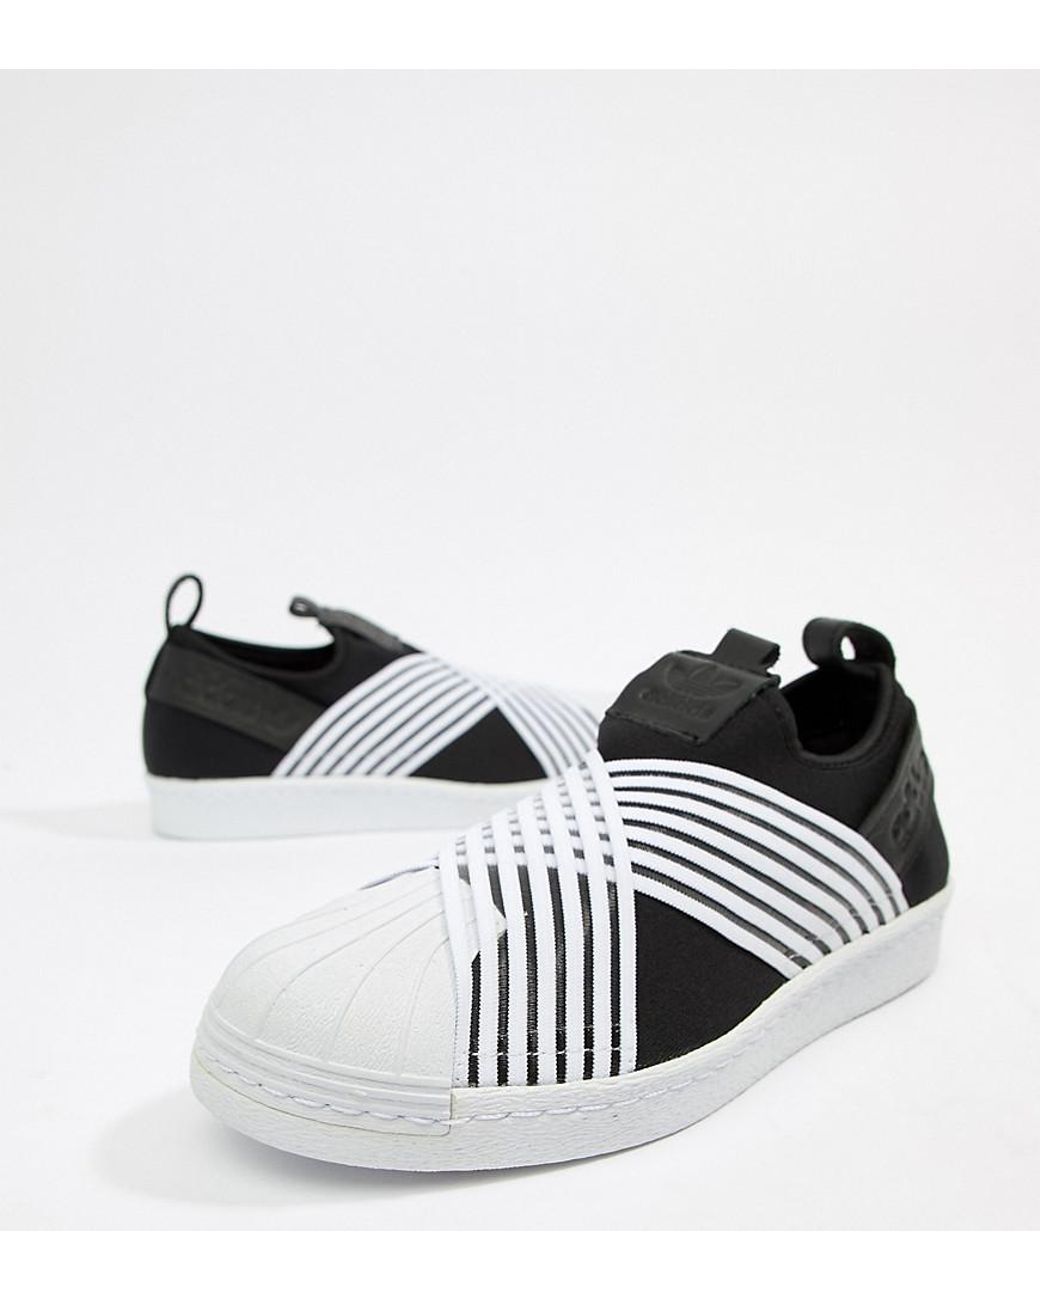 adidas Originals Superstar Slip On Sneakers In Black And White | Lyst Canada